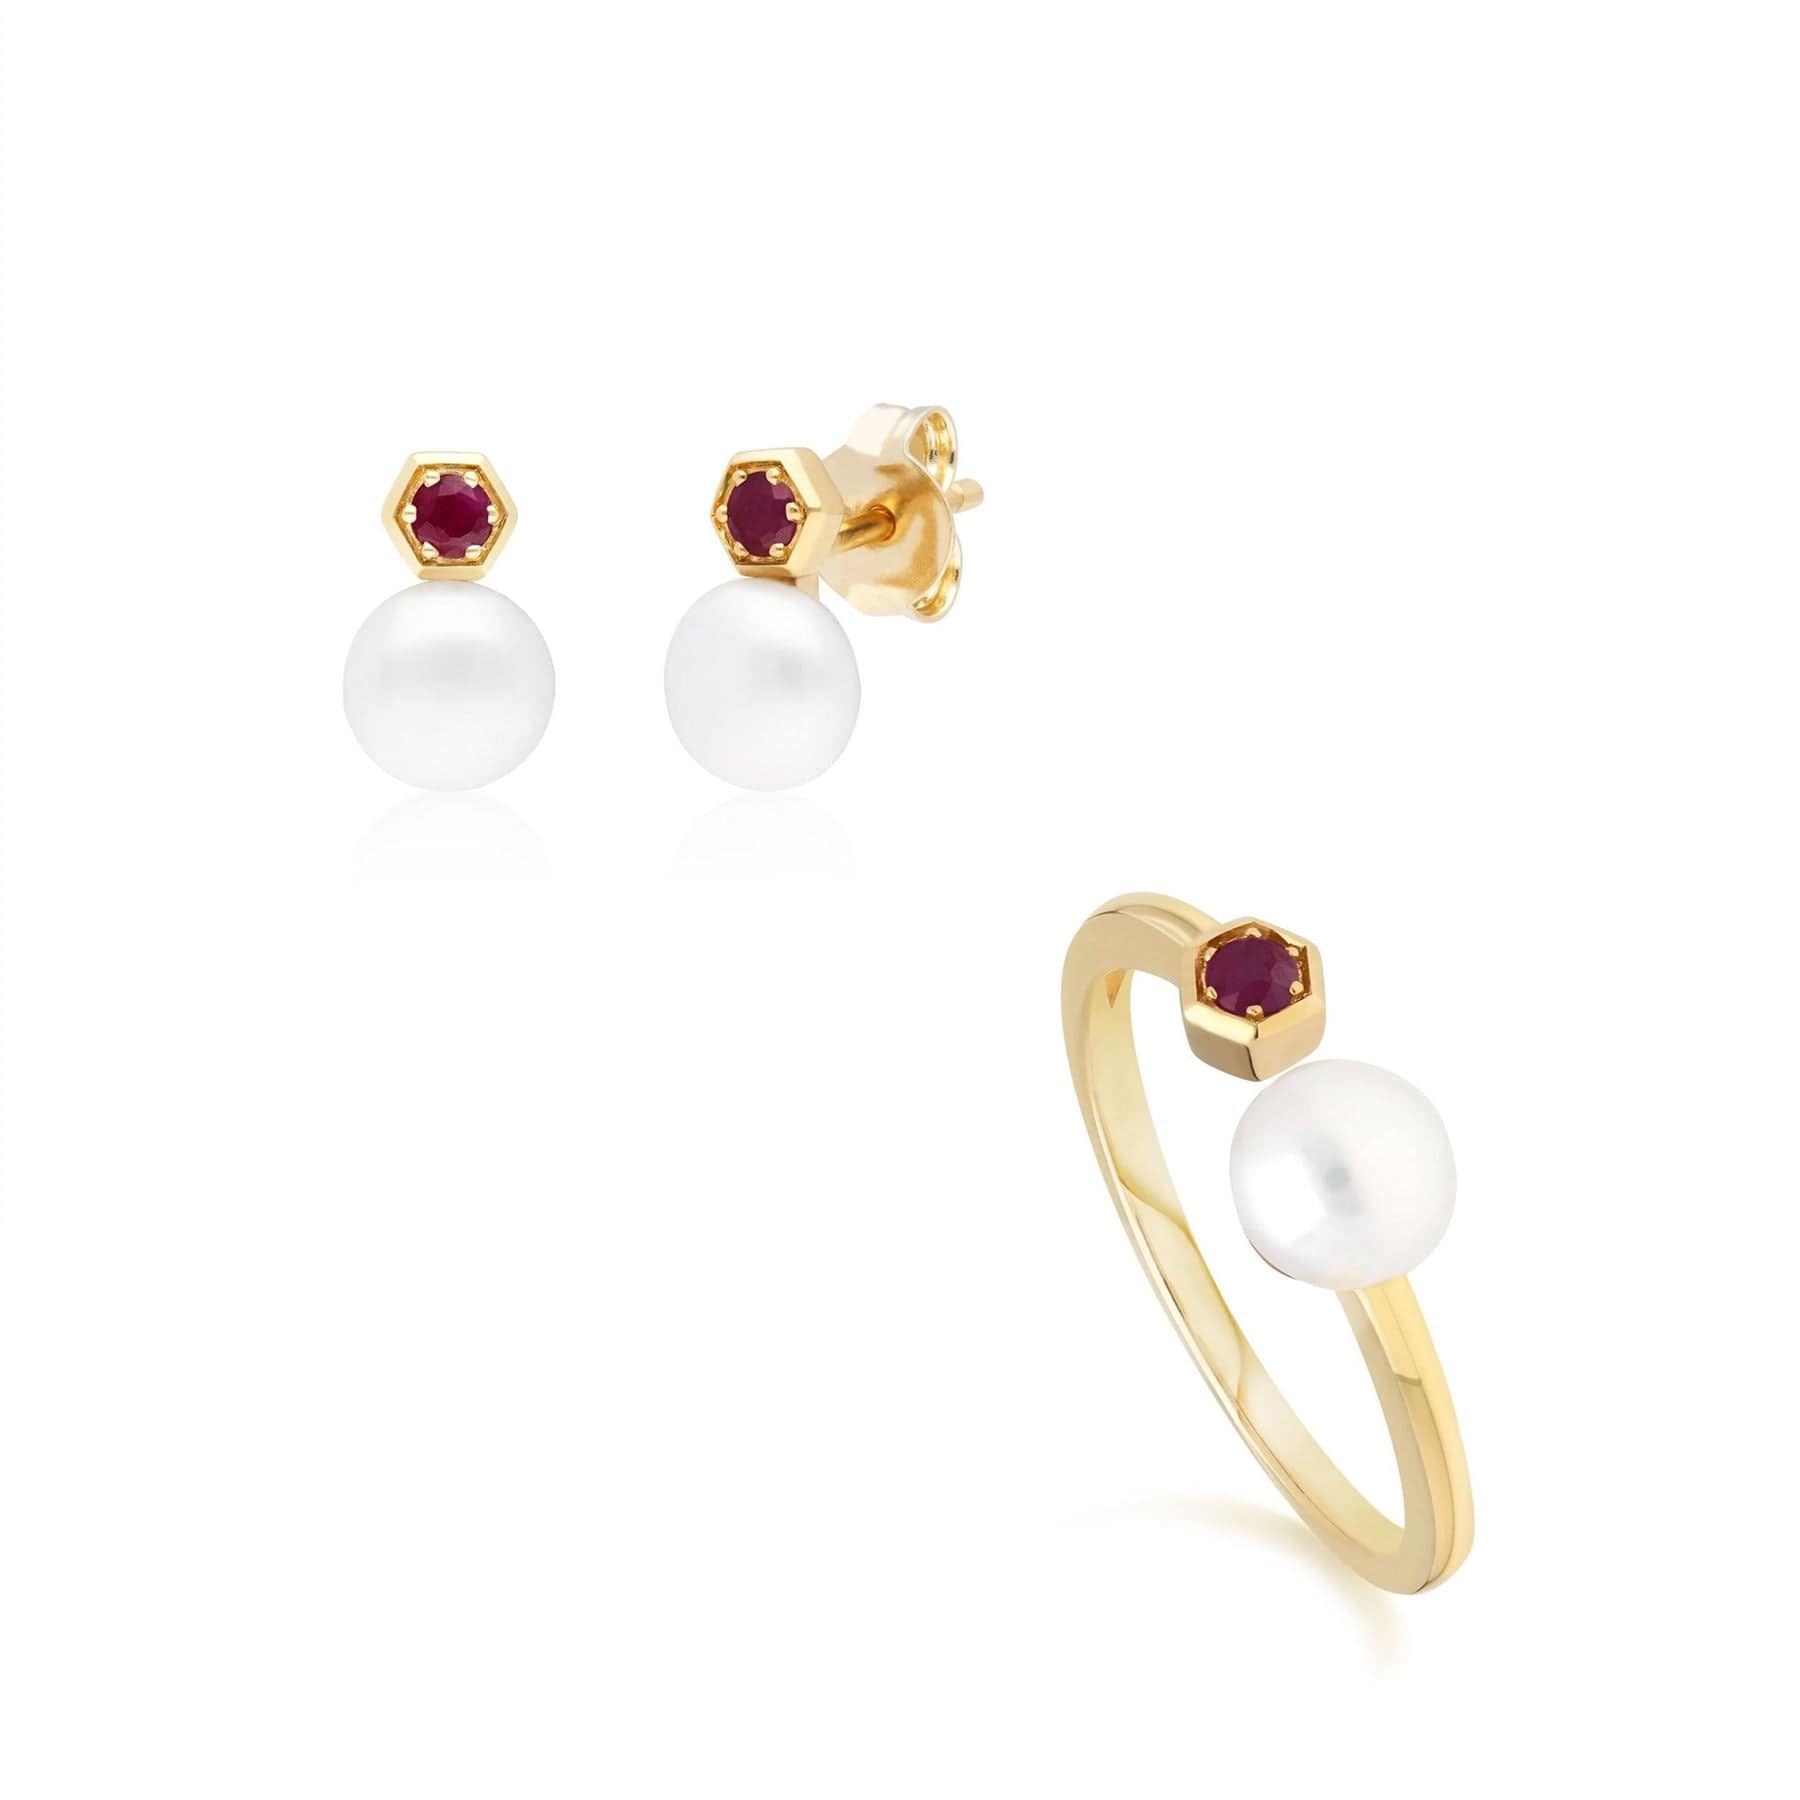 135E1633029-135R1840029 Modern Pearl & Ruby Earring & Ring Set in 9ct Gold 1